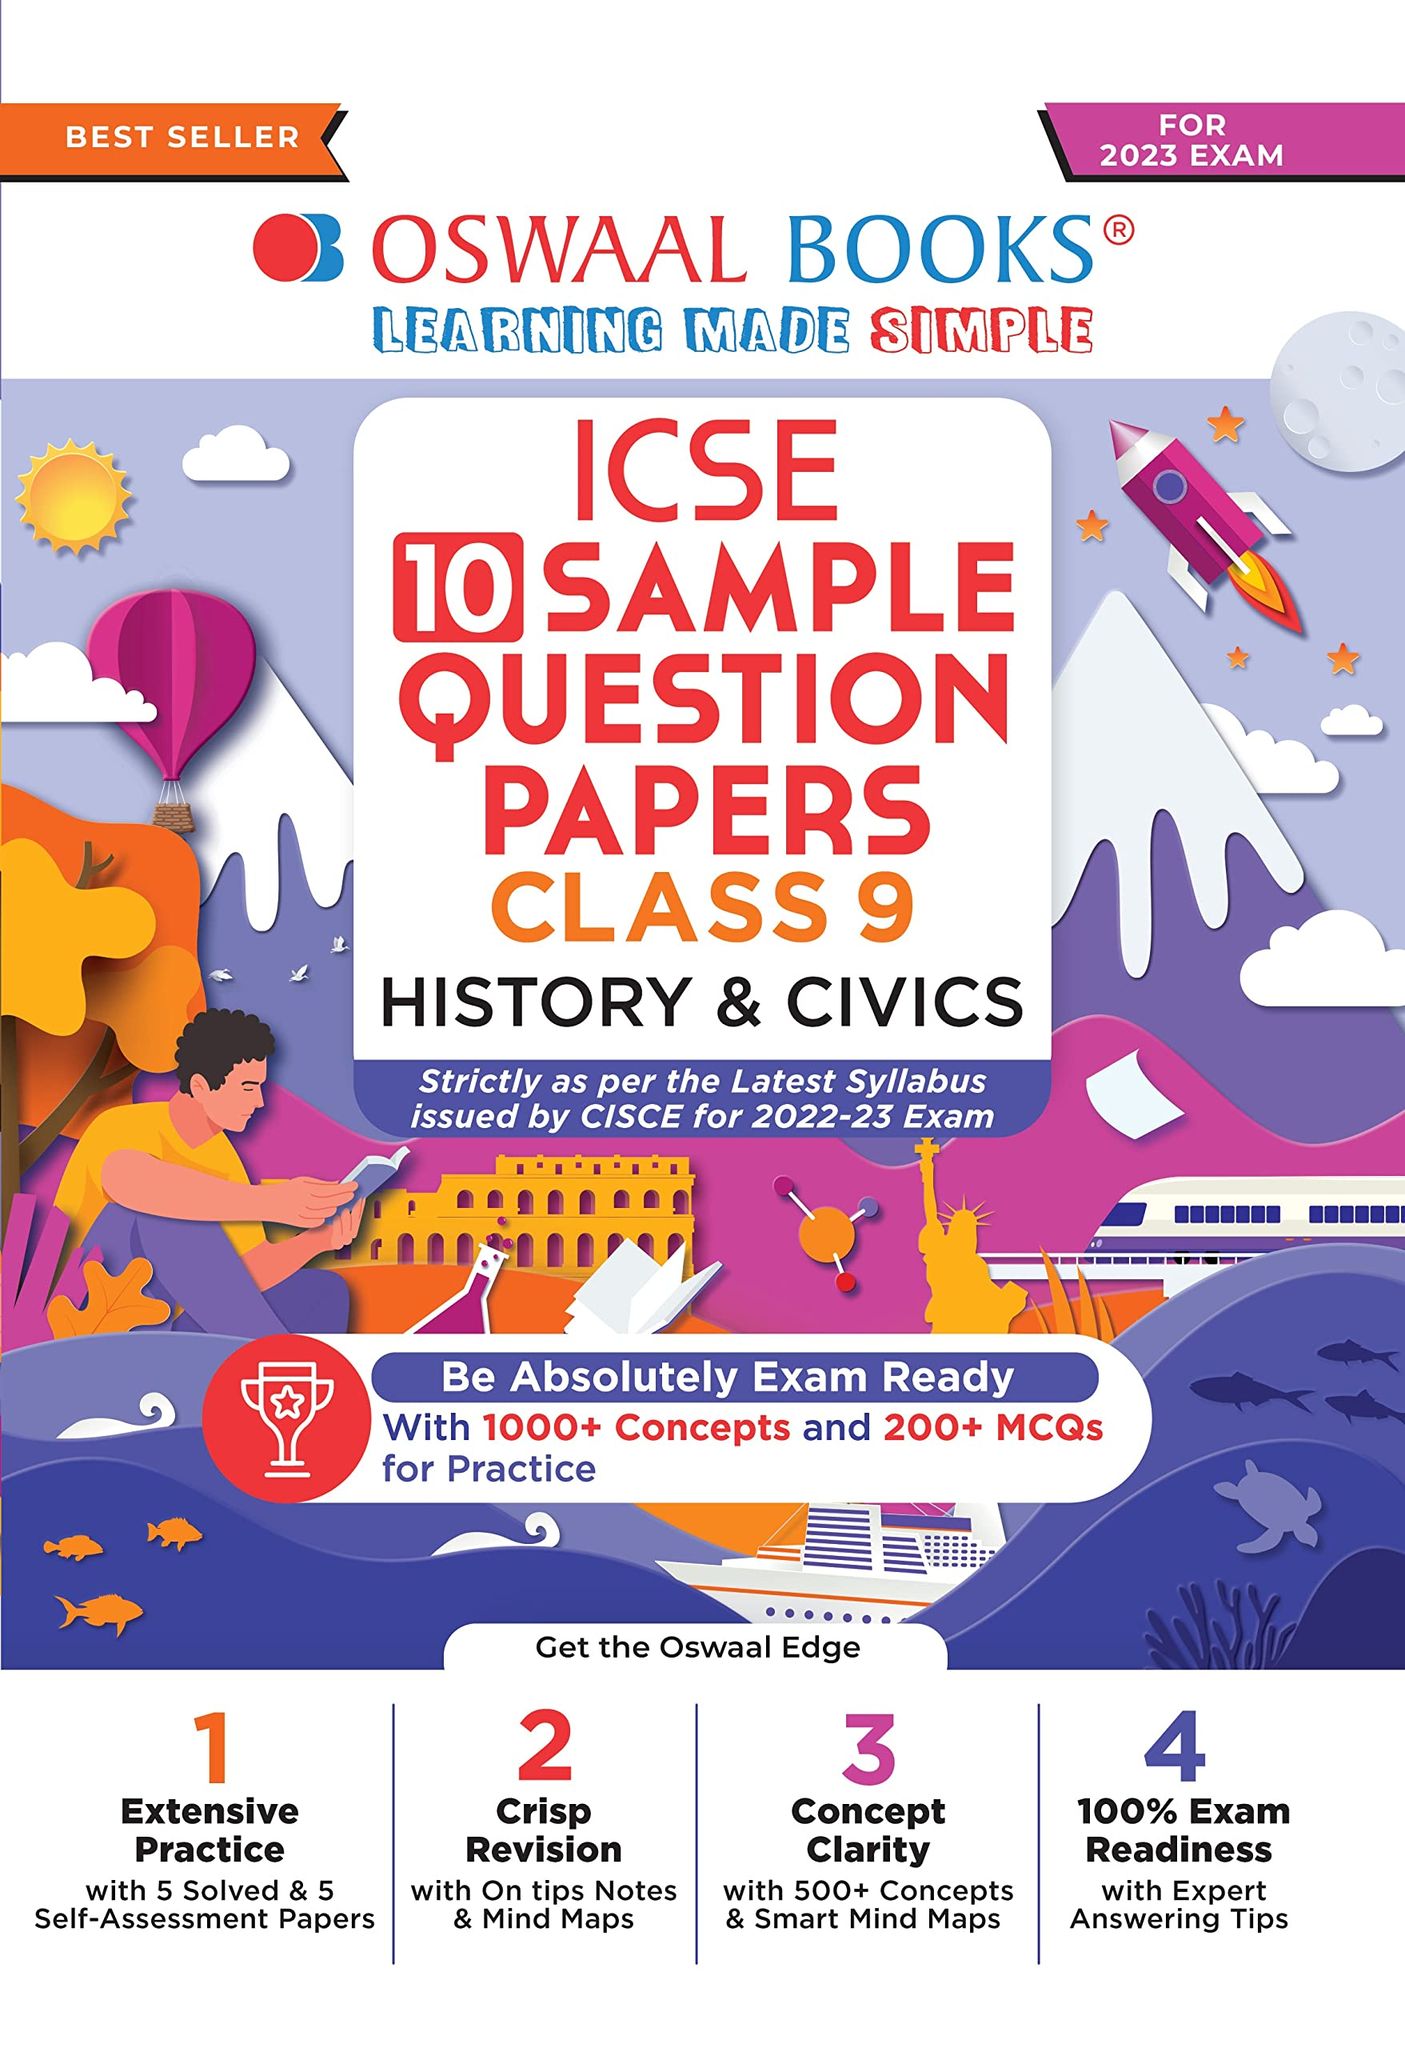 Oswaal ICSE Sample Question Papers Class 9 History & Civics Hardcover (For 2023 Exam) Oswaal Editorial Board